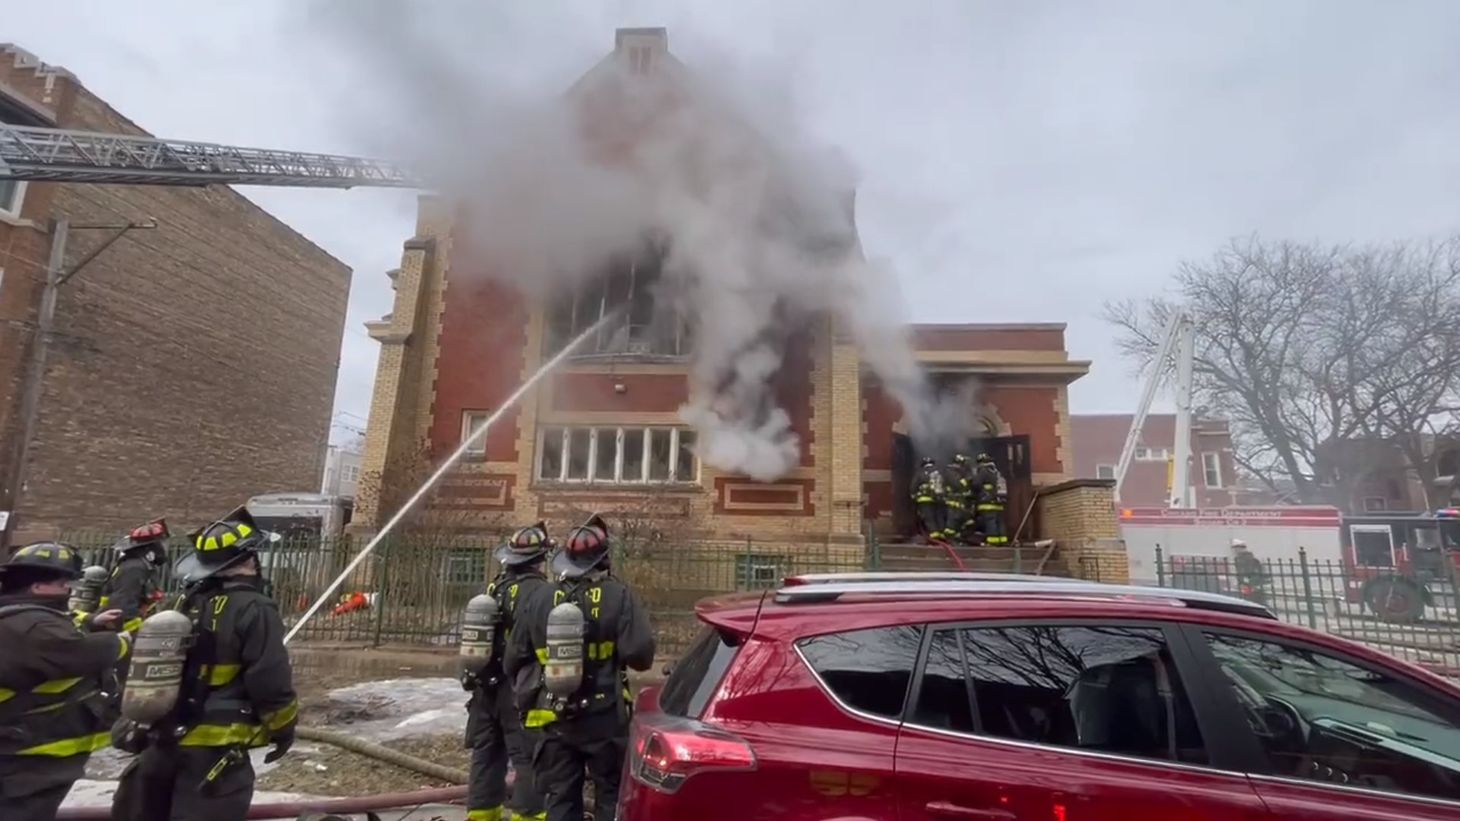 Church fire in Albany Park is third fire in neighborhood this week